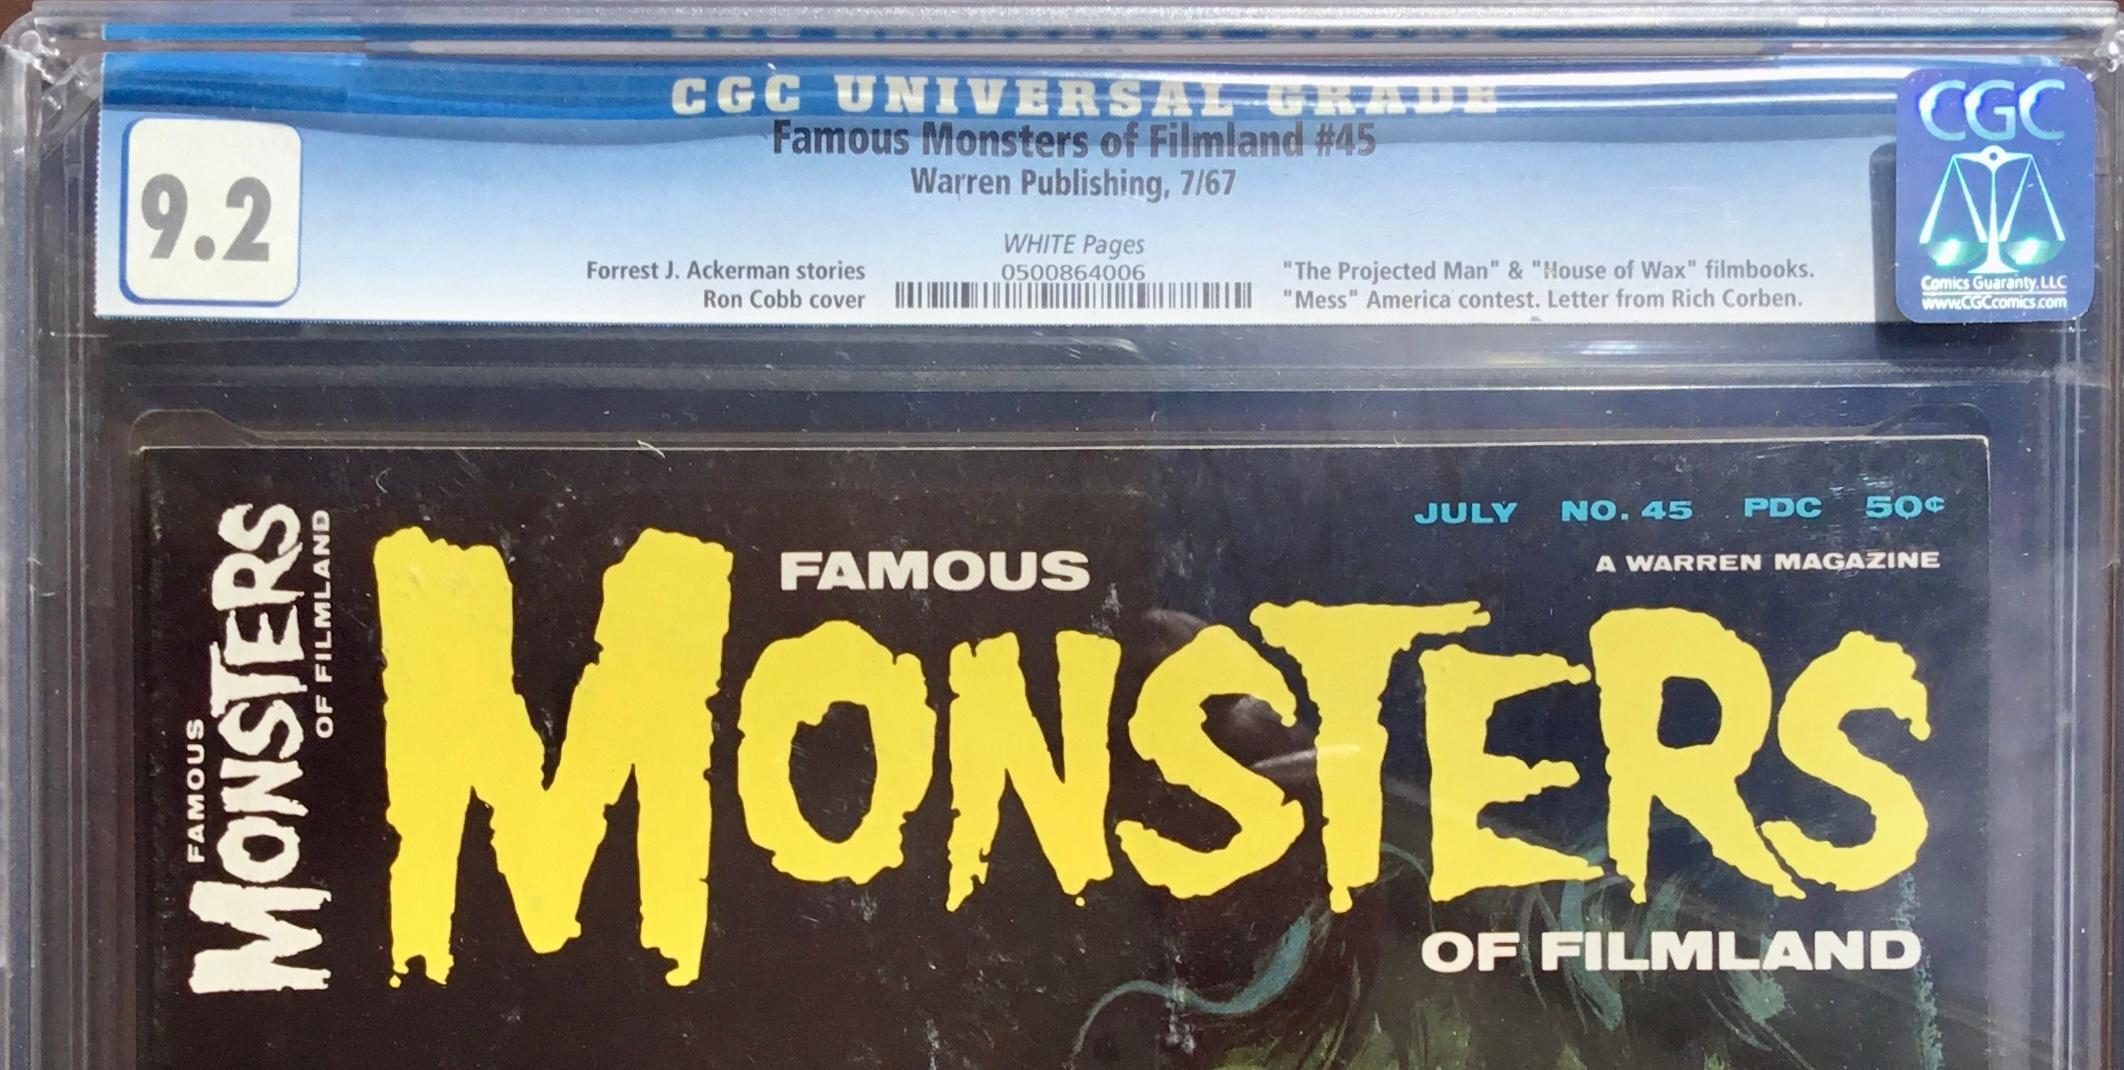 FAMOUS MONSTERS of FILMLAND No. 45 (July 1967) CGC Graded 9.2 (NM-) by ...